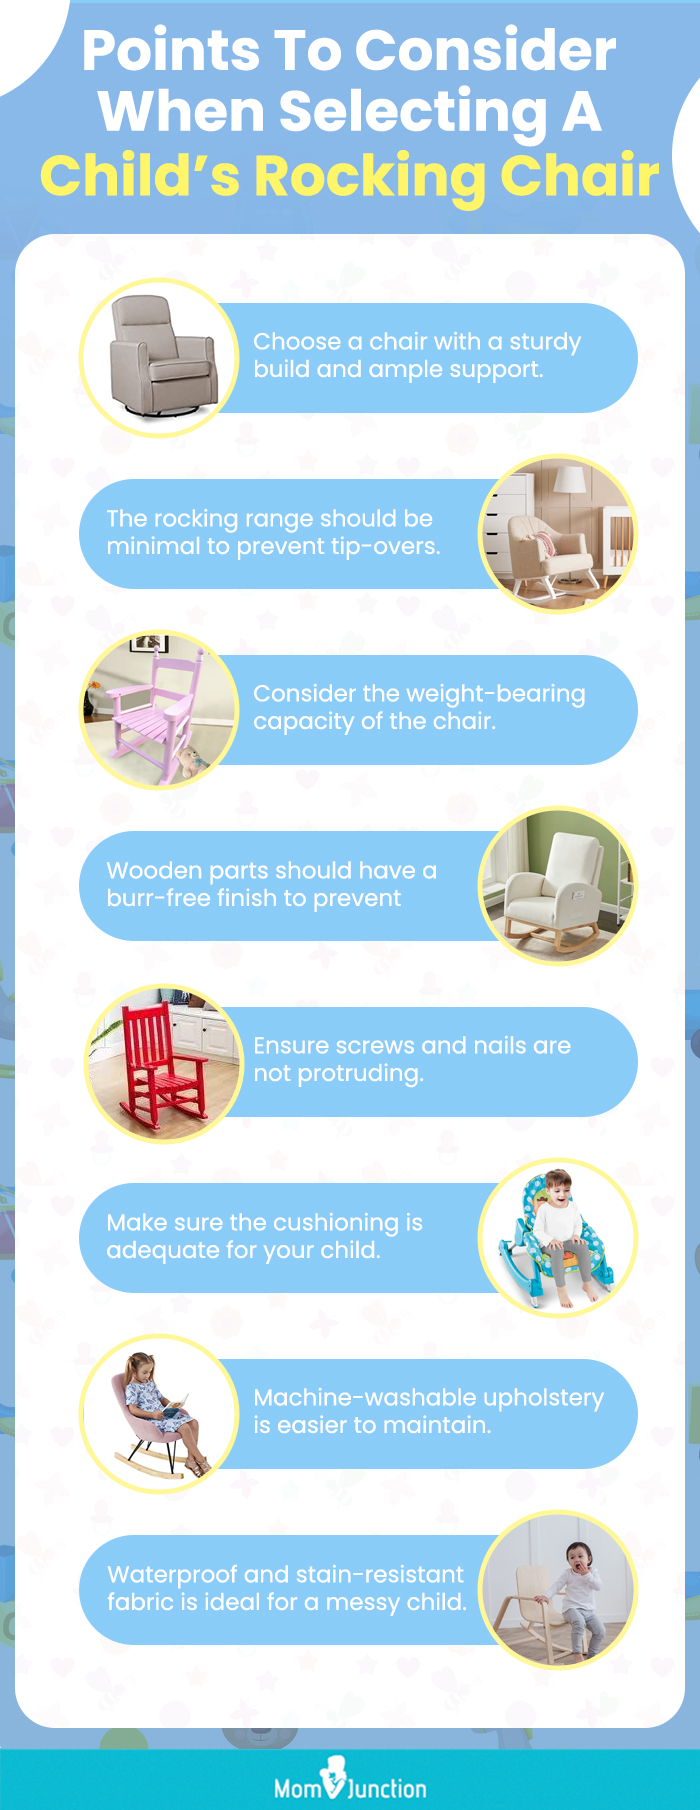 Points To Consider When Selecting A Child’s Rocking Chair (infographic)